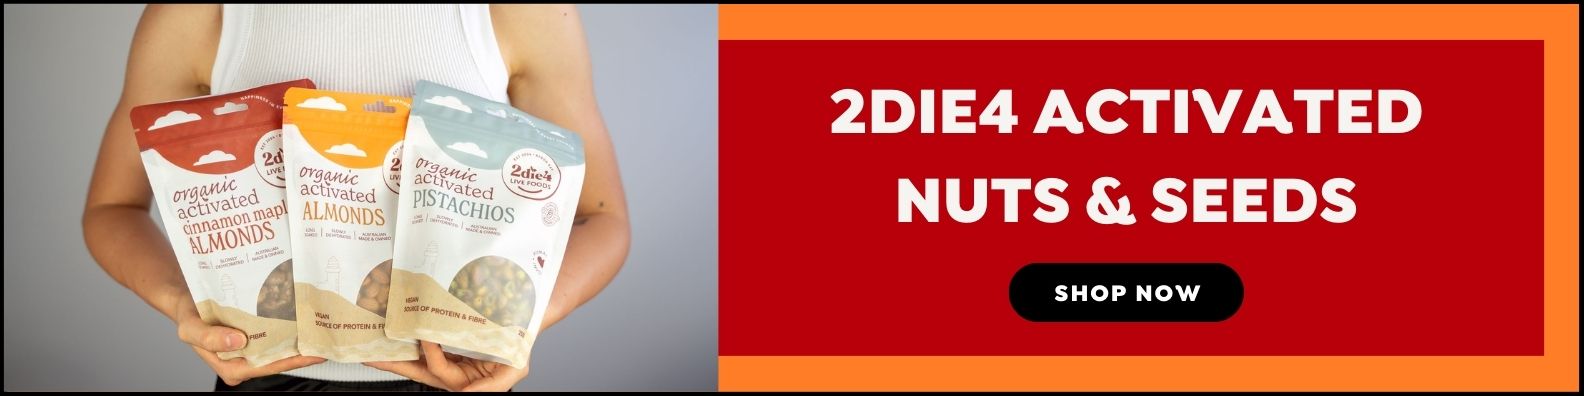 2 DIE 4 LIVE FOODS Activated Nuts and Seeds